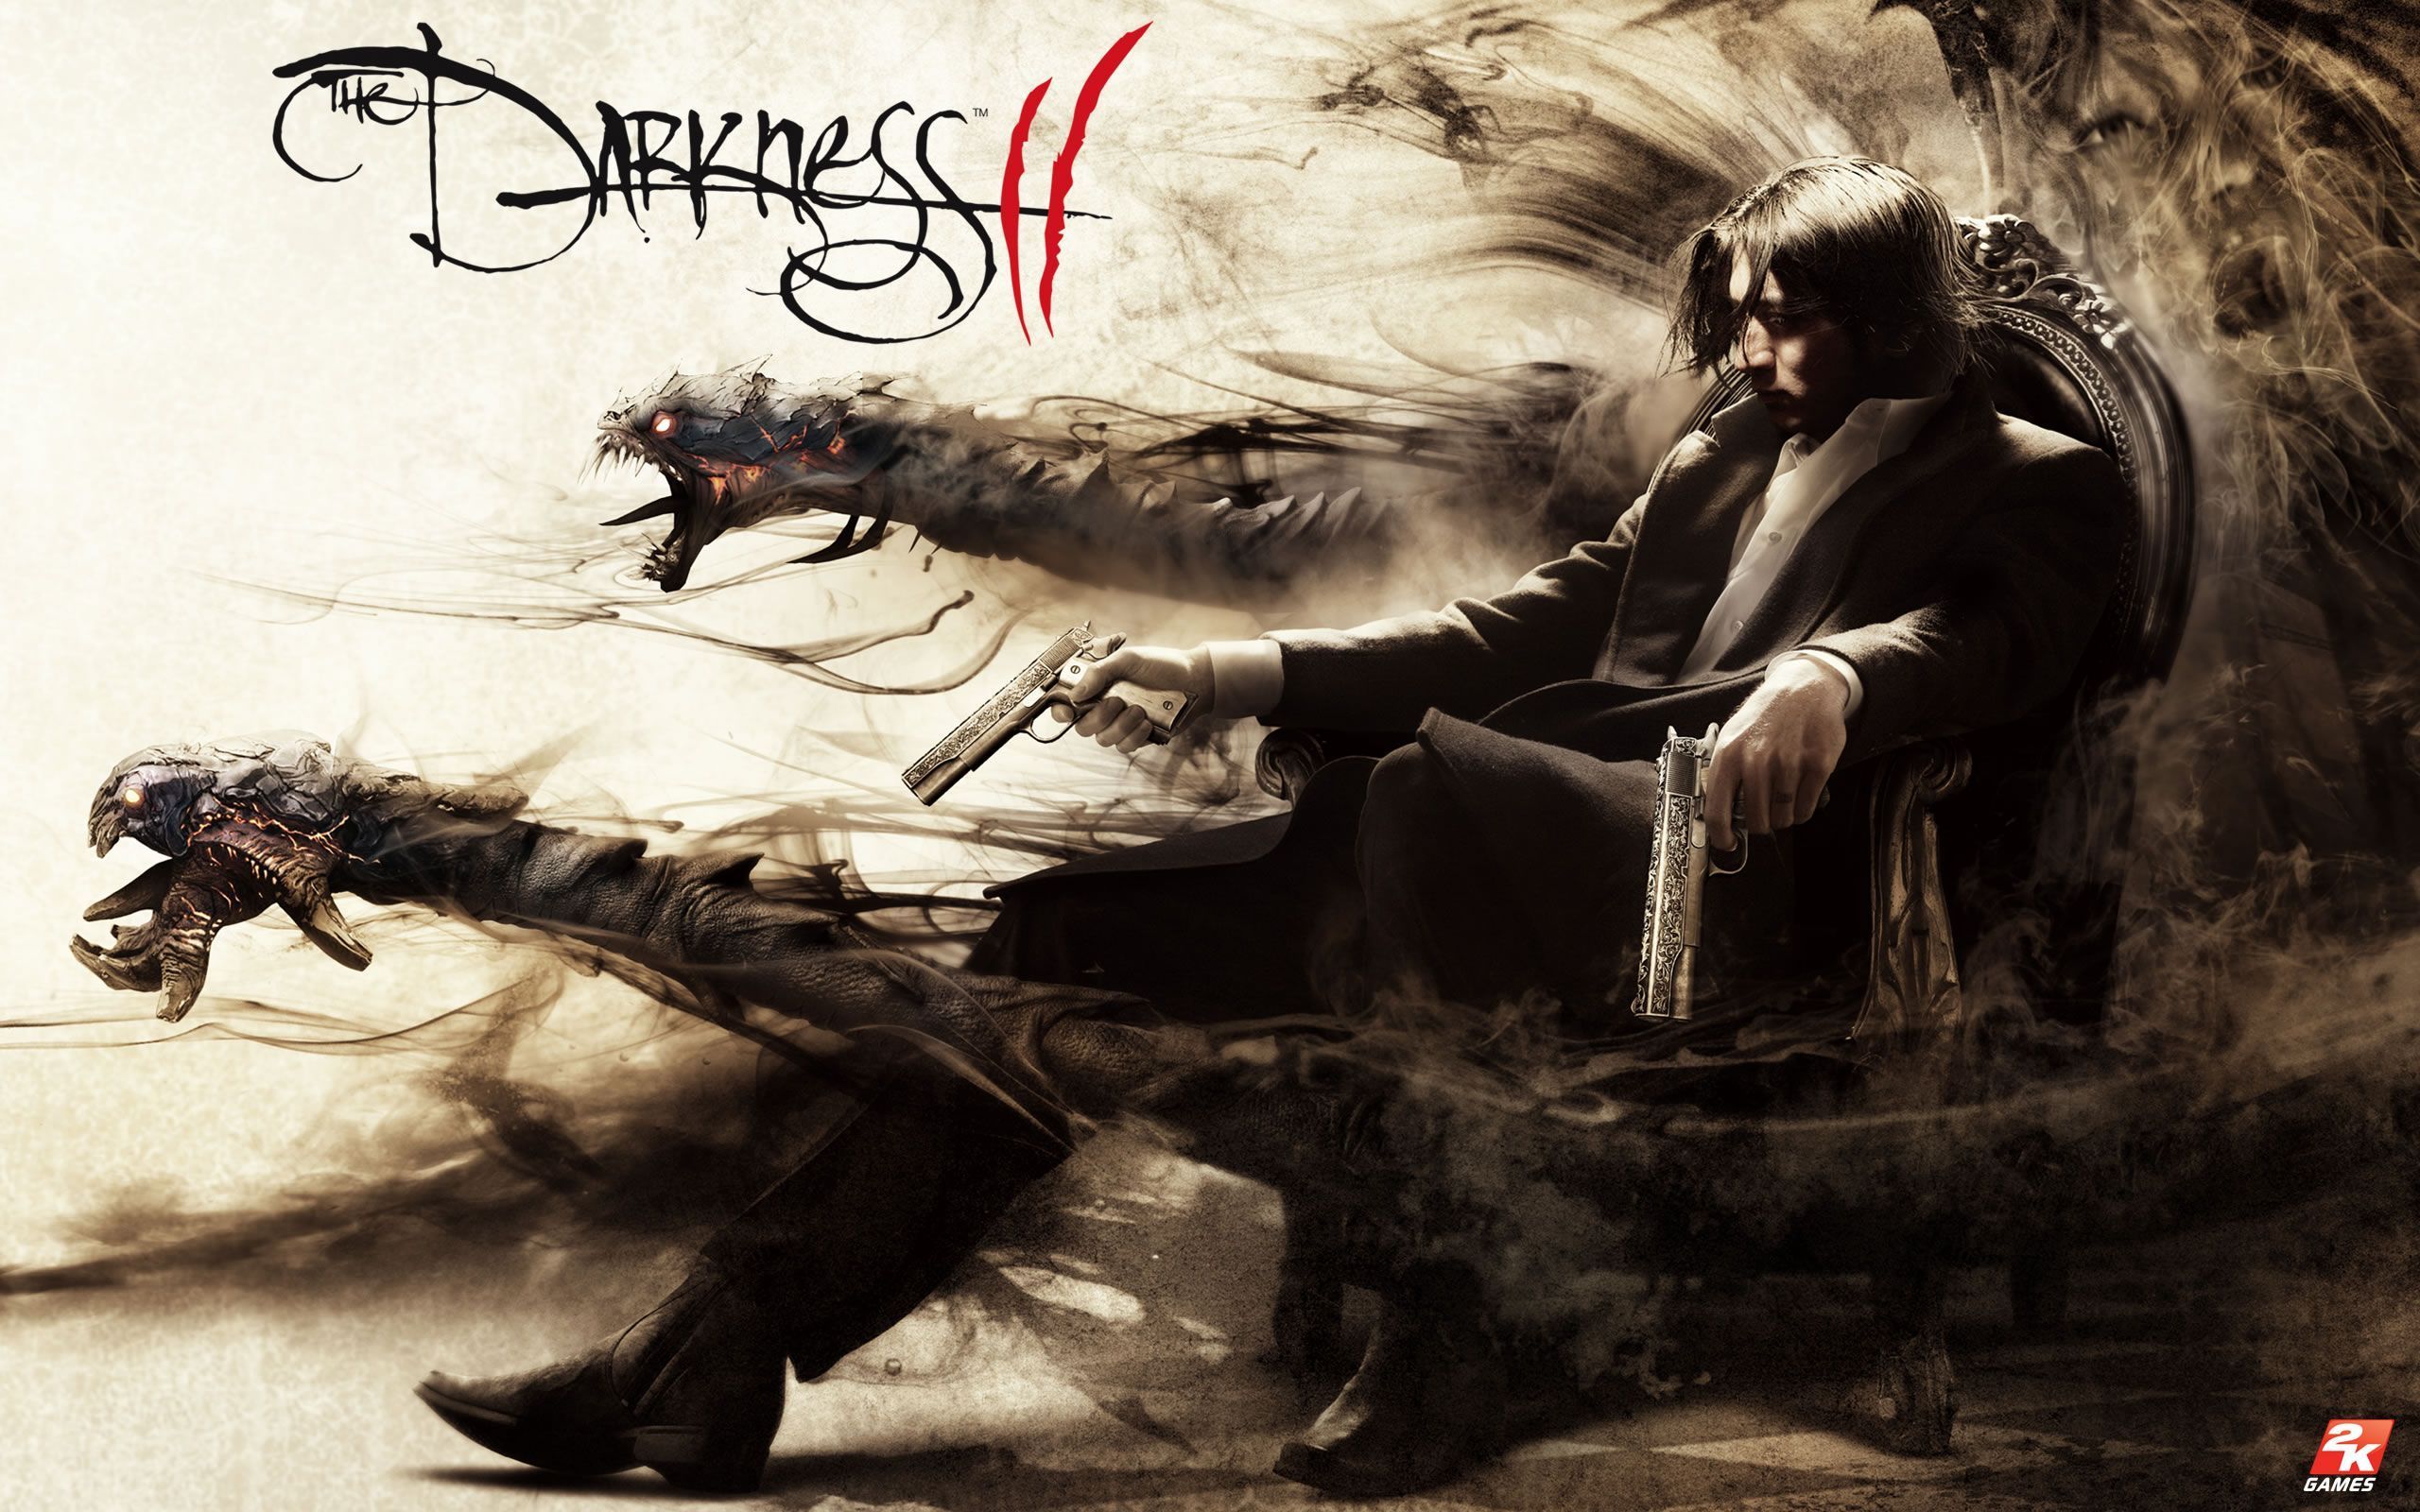 The Darkness II Wallpapers HD Backgrounds